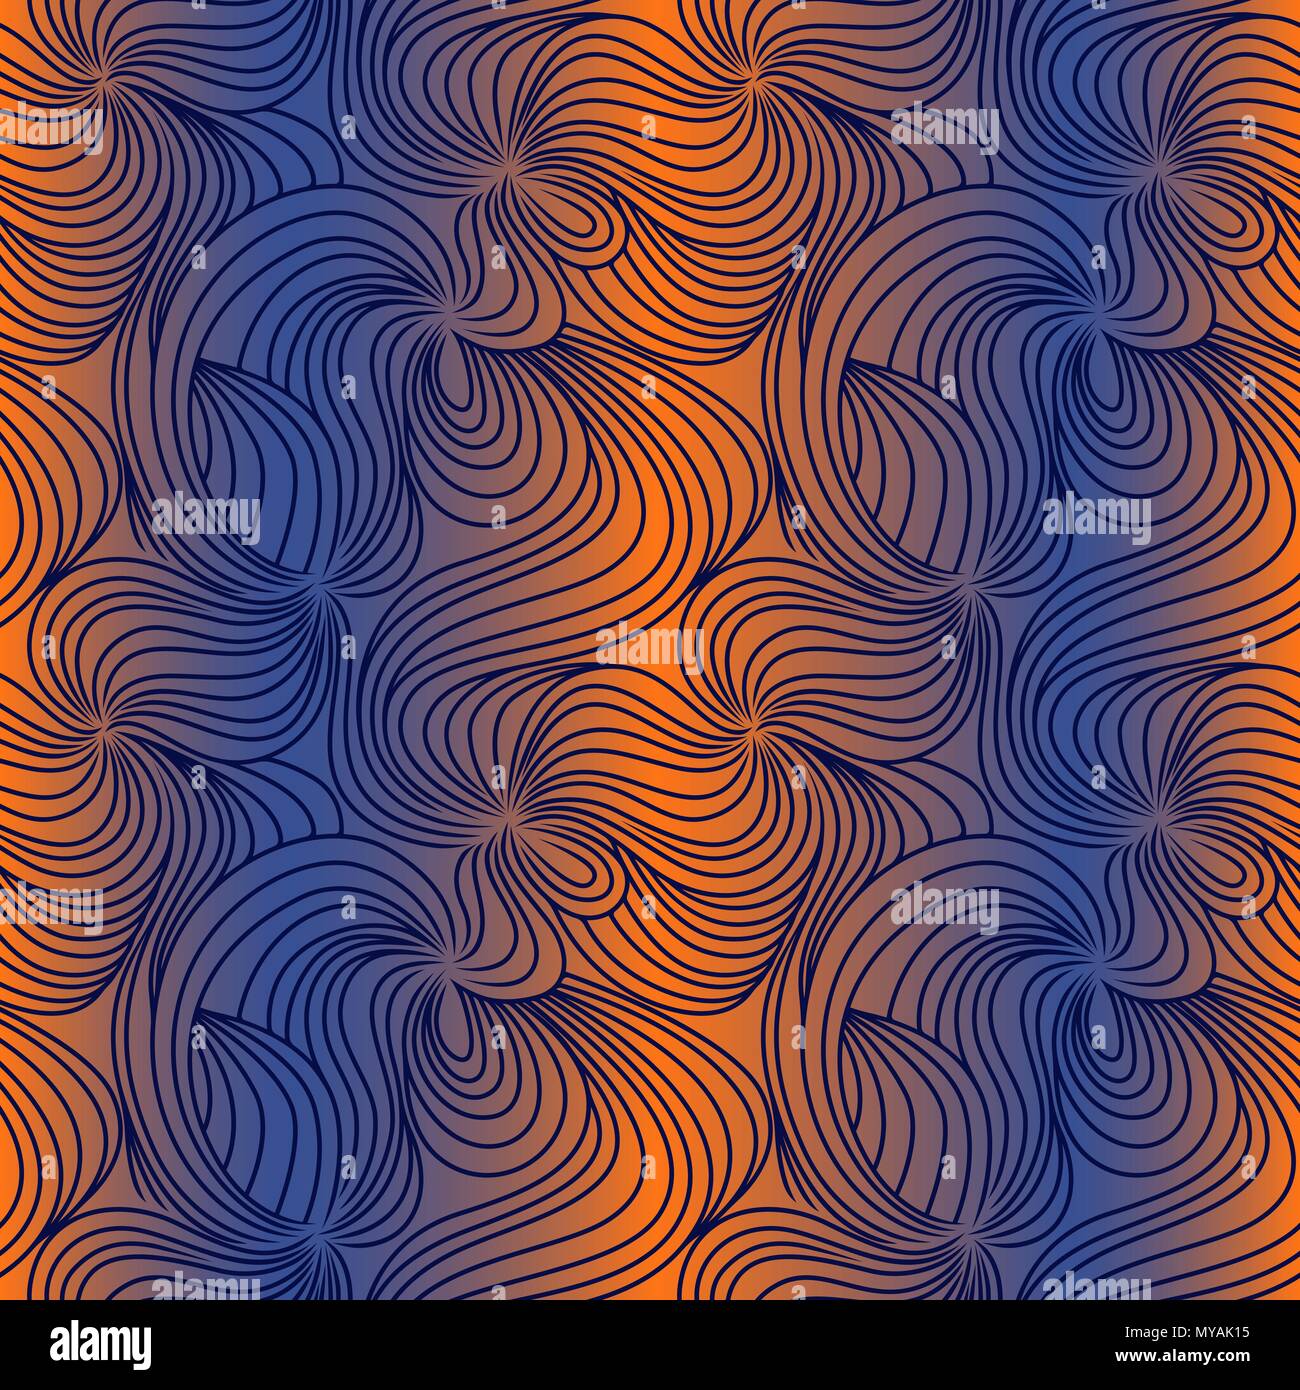 Interwoven wavy lines and curves on the gradient background of orange and blue, seamless vector pattern as a fabric texture Stock Vector